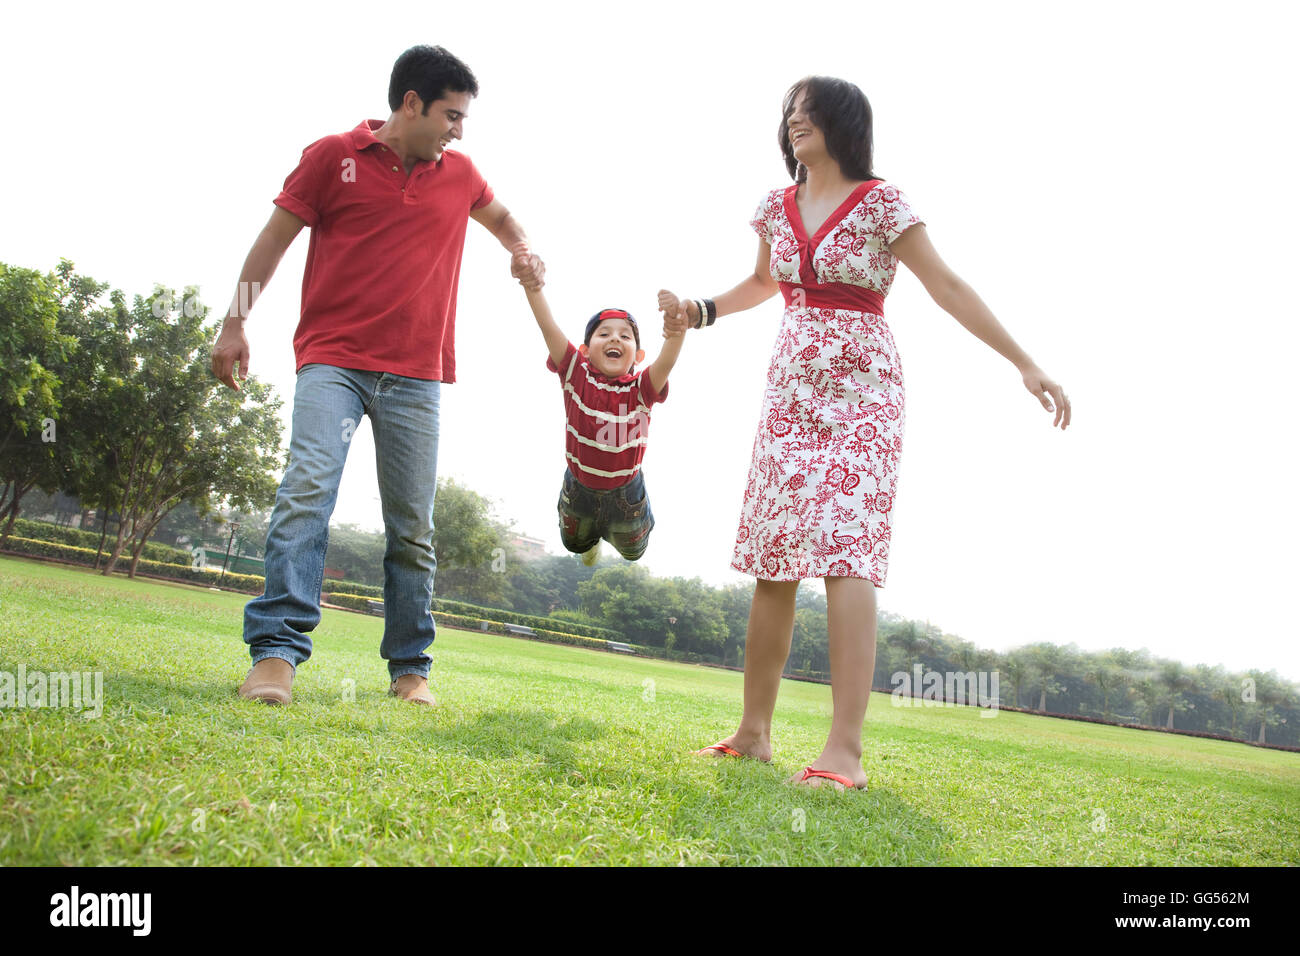 Son having fun with his parents Stock Photo